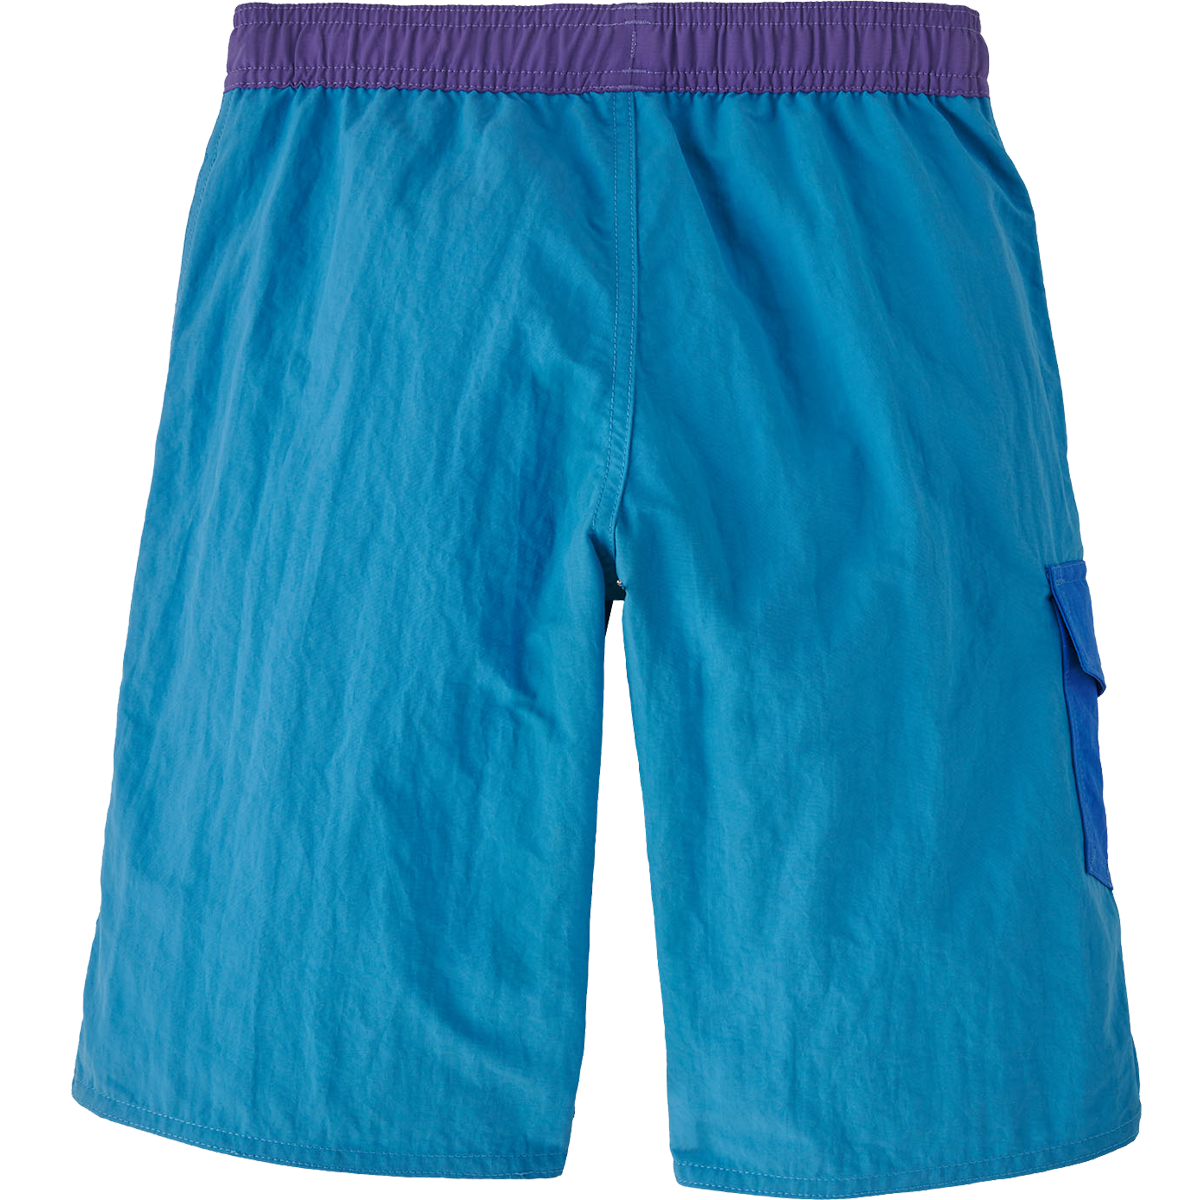 Youth Baggies Boardshorts alternate view